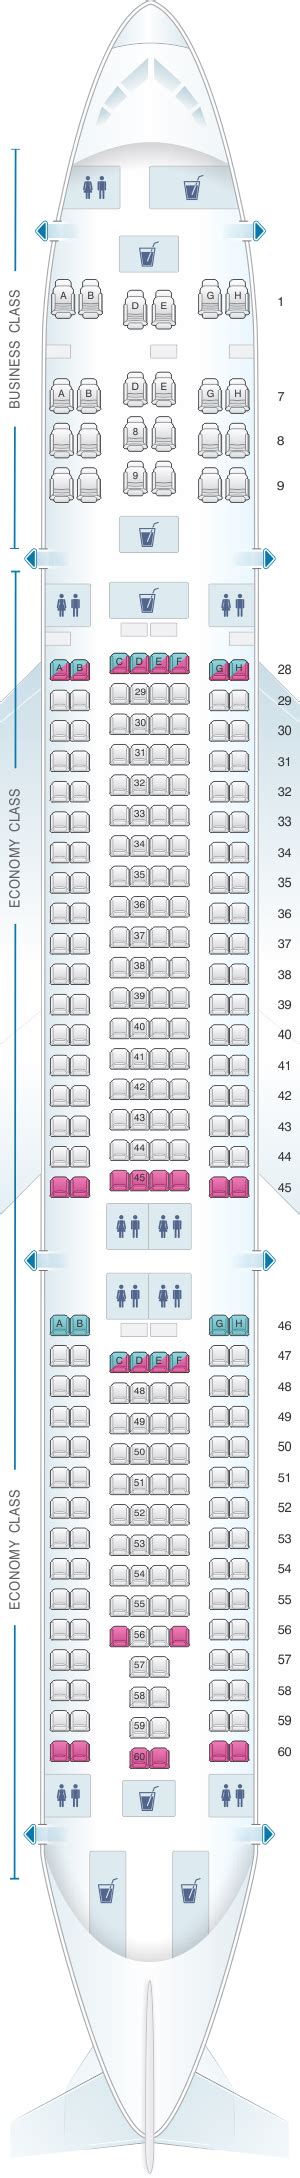 Seat Map Csa Czech Airlines Airbus A Seatmaestro